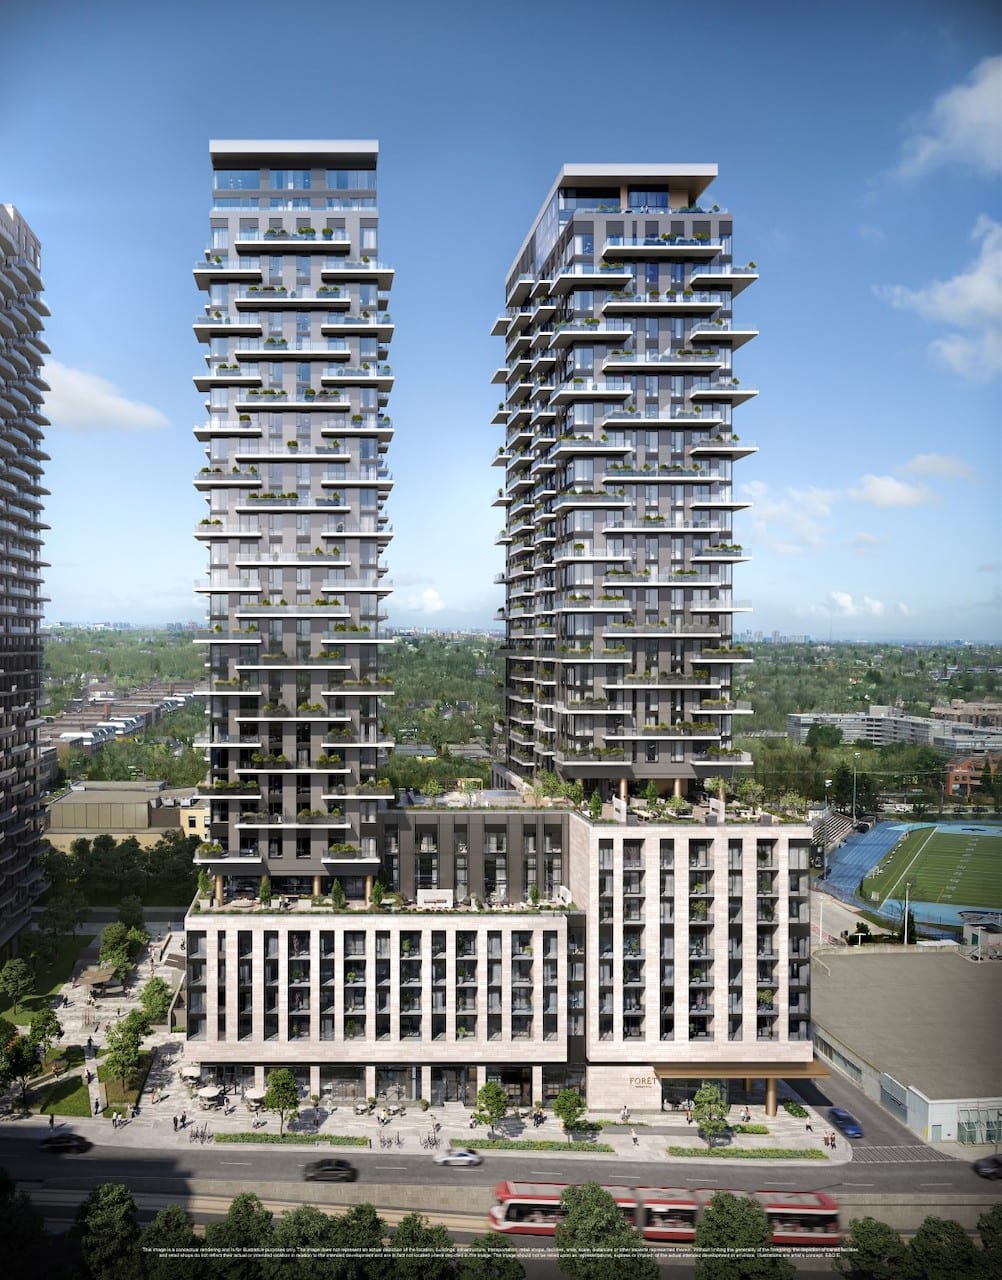 Rendering of Foret Condos exterior full view